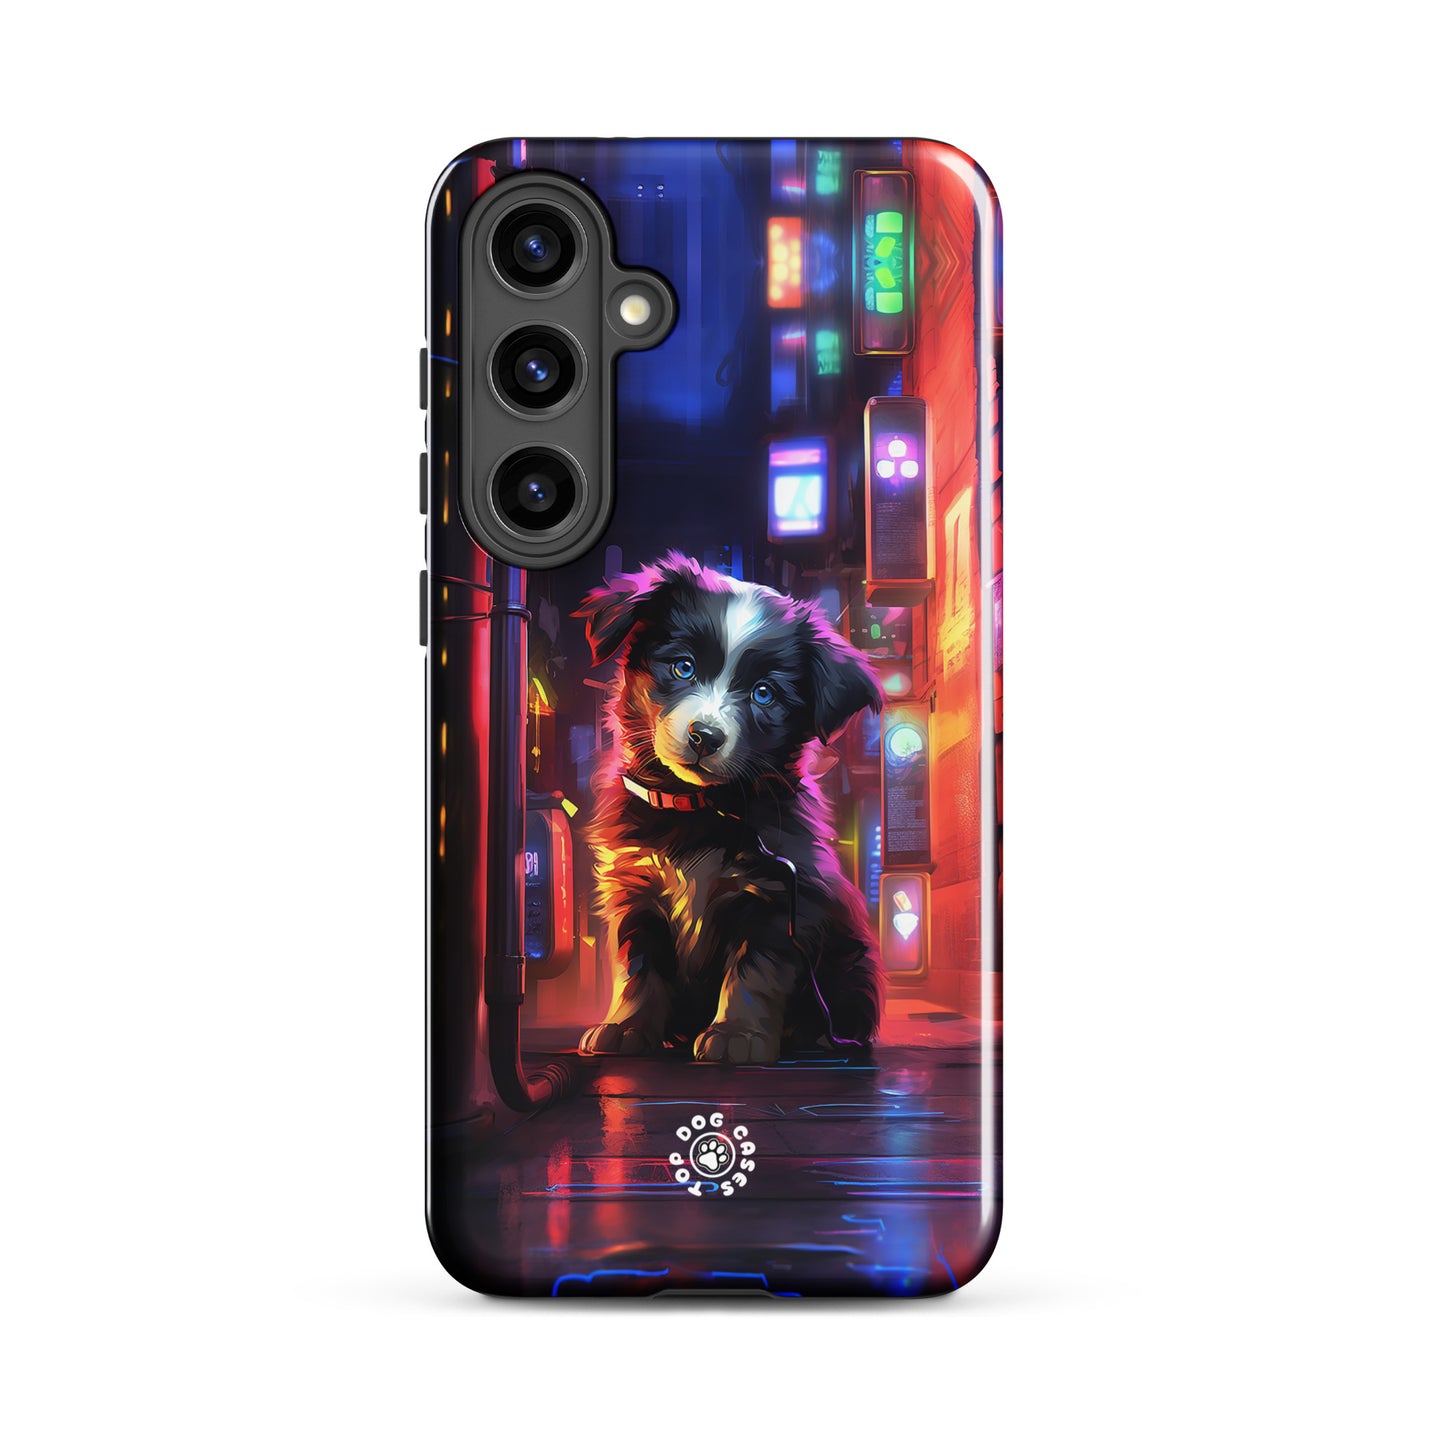 Border Collie in the City - Samsung Phone Case - Cute Phone Cases - Top Dog Cases - #BorderCollie, #CityDog, #CityDogs, #CuteDogs, #SamsungGalaxyCase, #SamsungGalaxyS20, #SamsungGalaxyS21, #SamsungGalaxyS22, #SamsungGalaxyS22Ultra, #SamsungGalaxyS23, #SamsungGalaxyS23Ultra